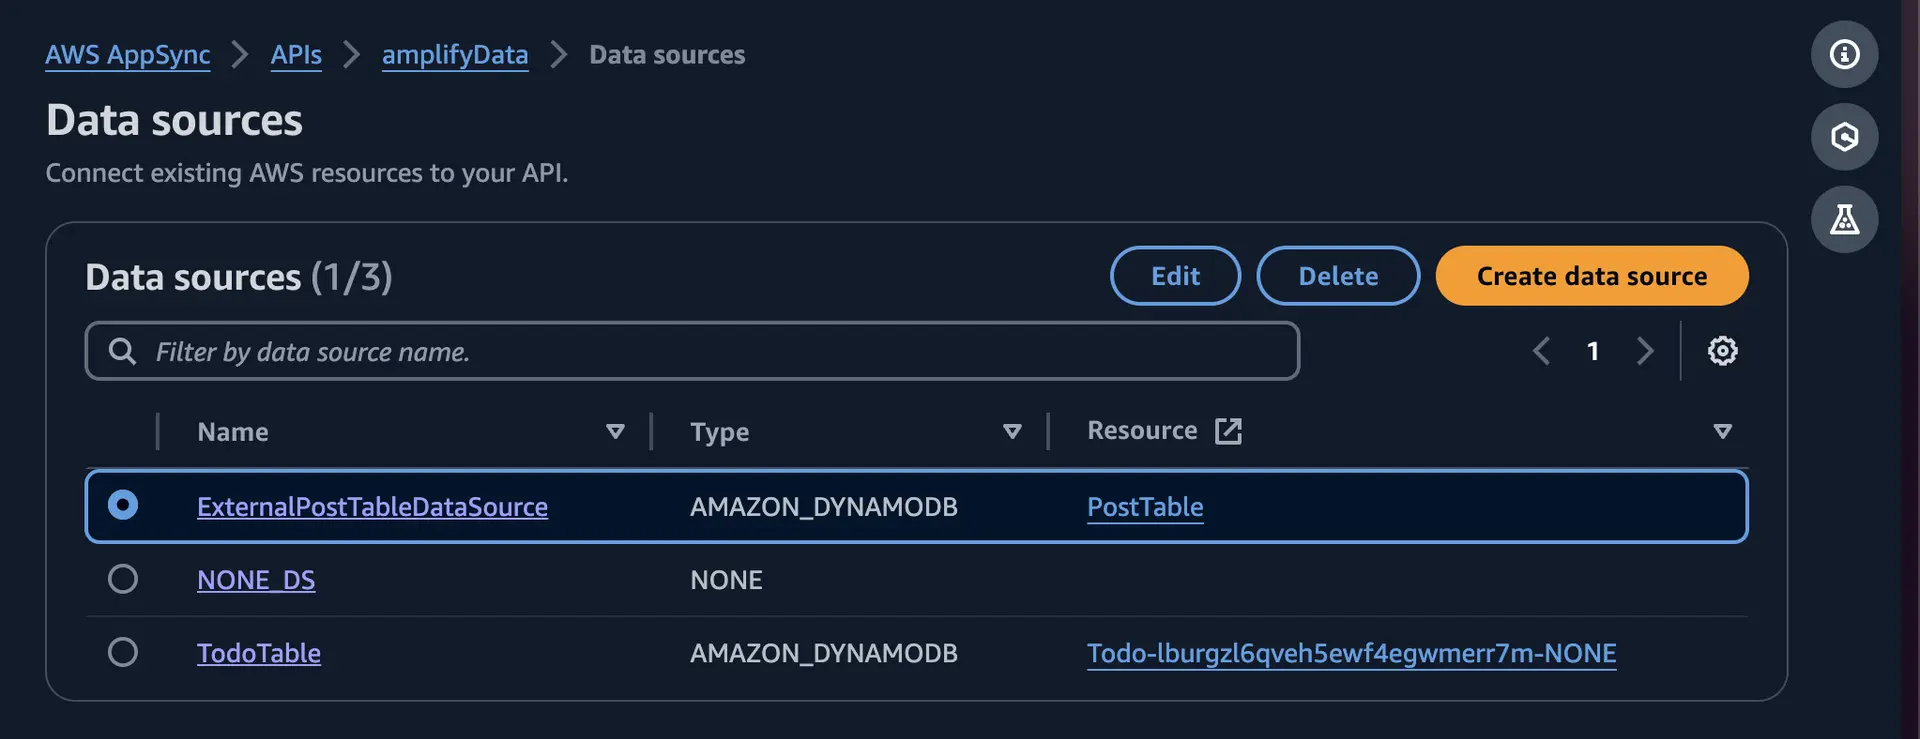 AWS AppSync console, 'Data sources' page. The page shows a list of existing data sources connected to an API. The data sources include an Amazon DynamoDB table named 'PostTable' and another table named 'Todo'.*